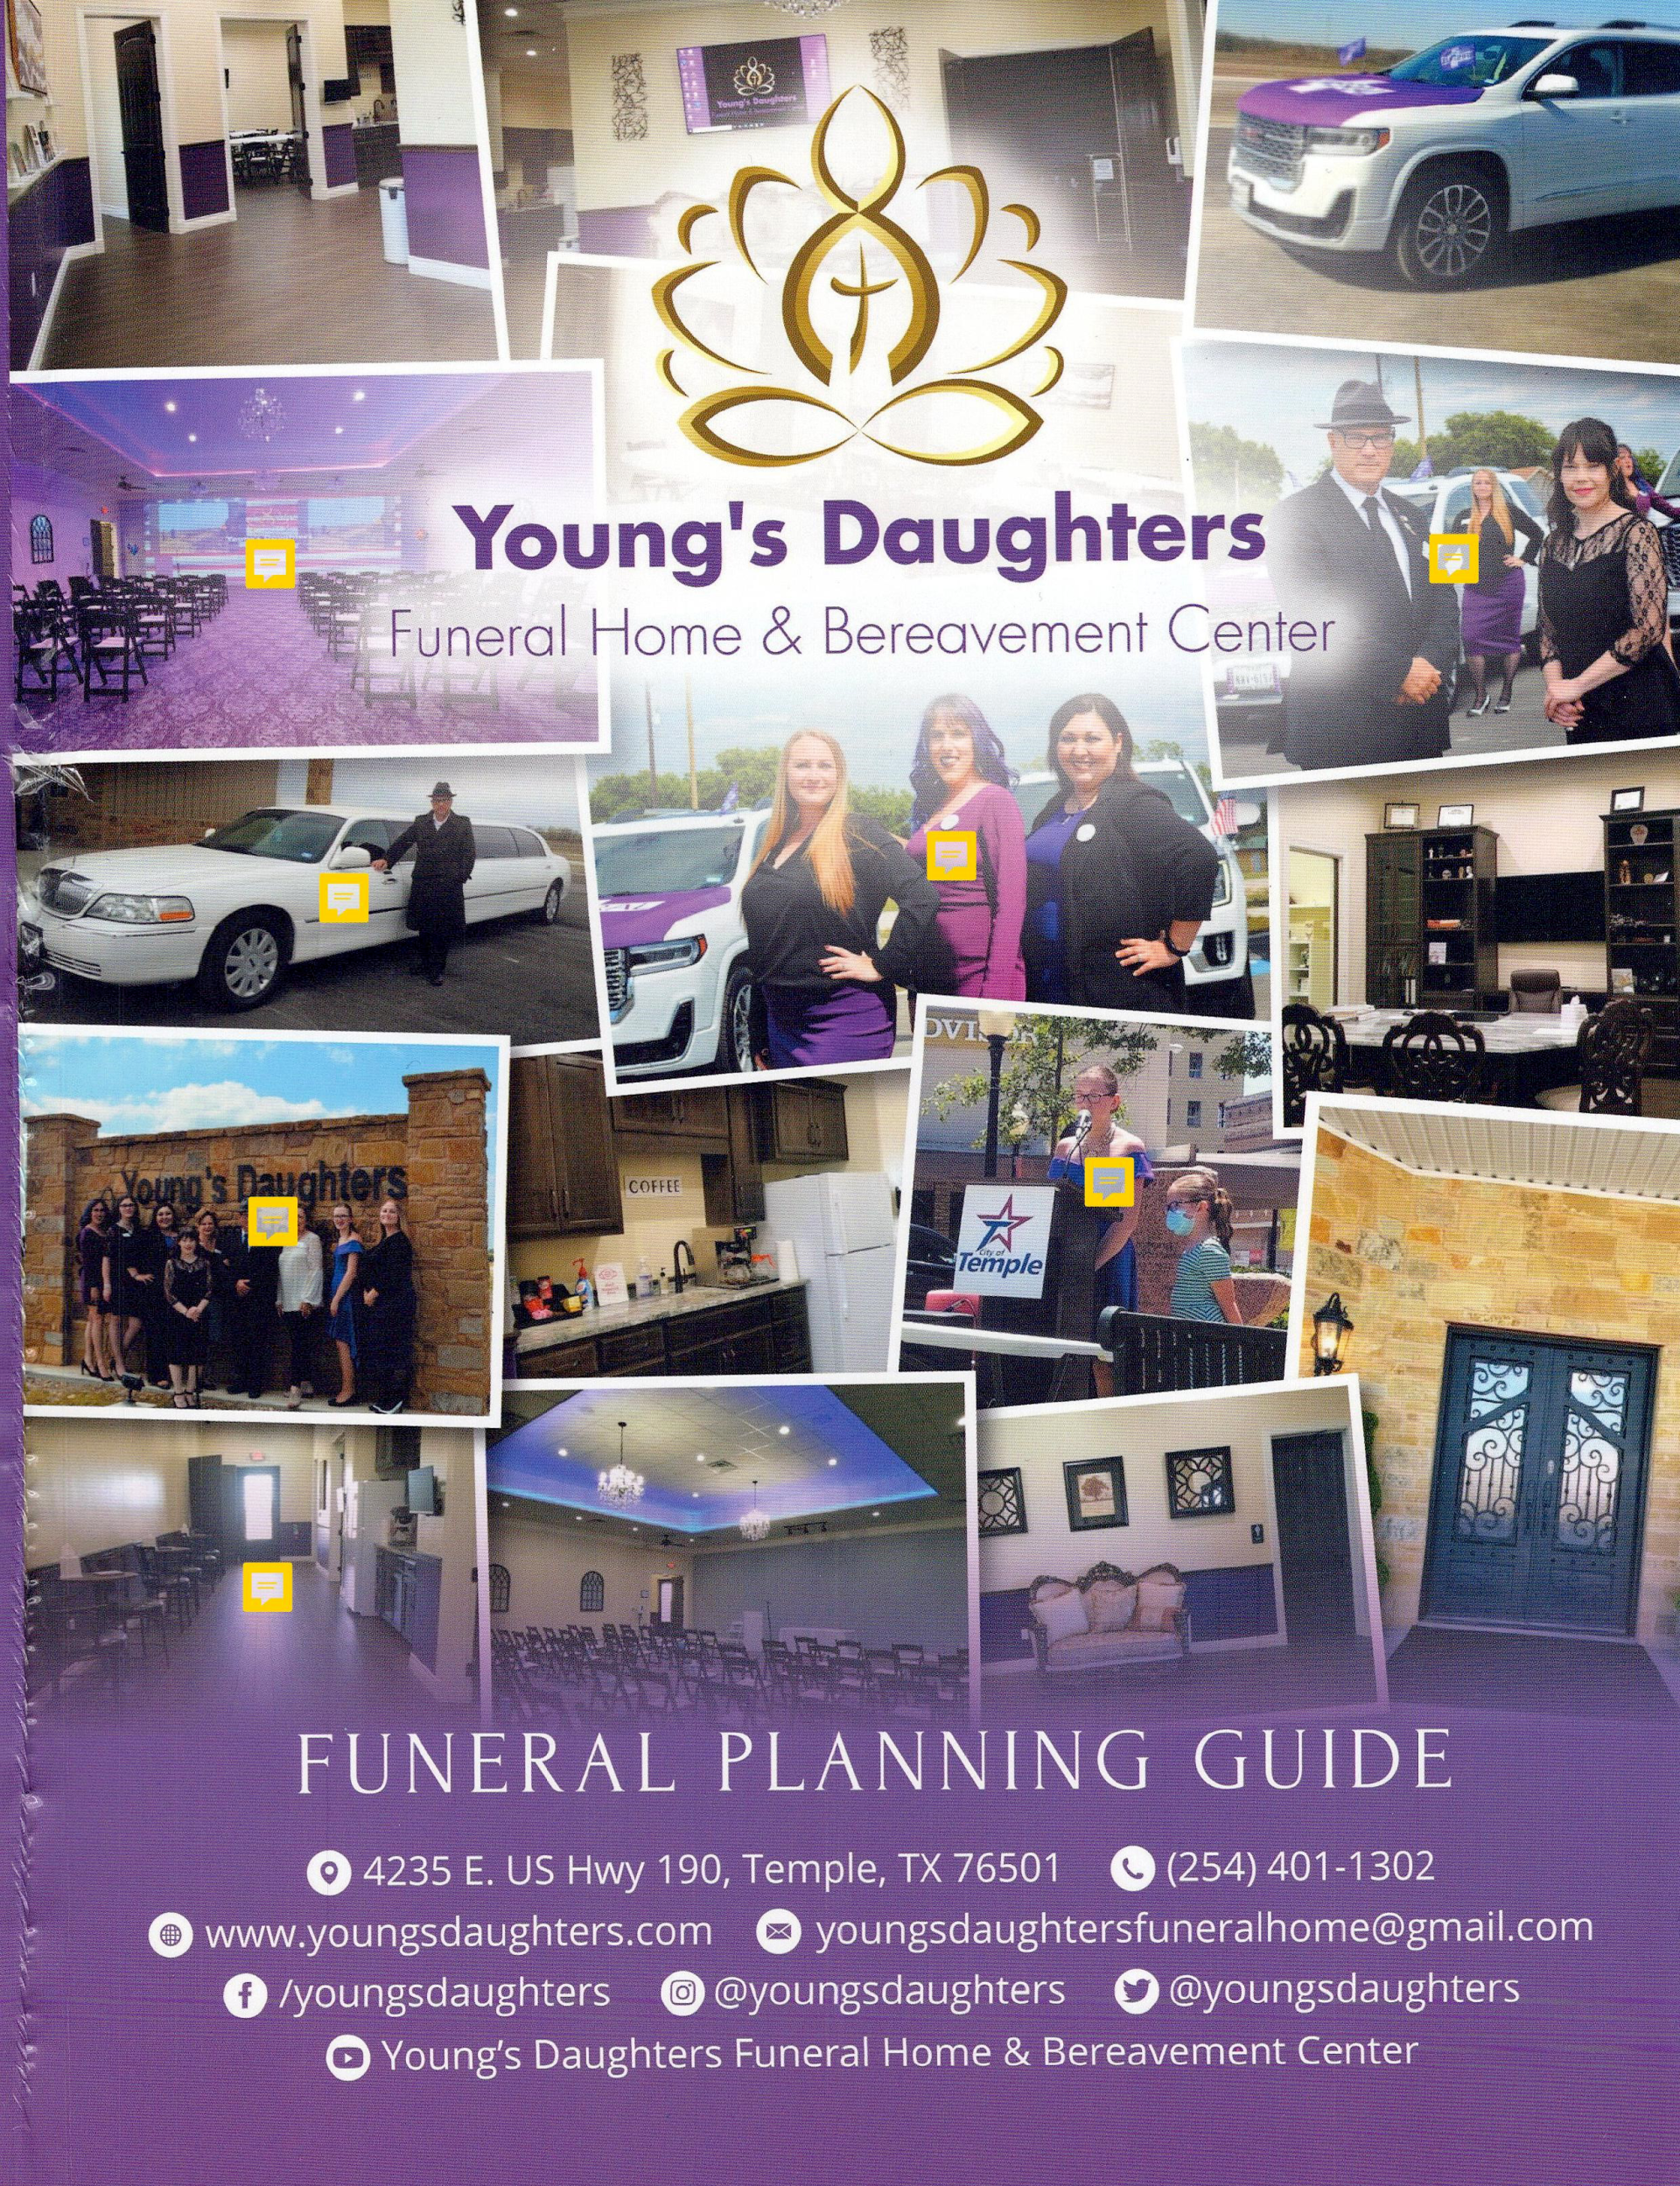 The Best Funeral Home in Central Texas